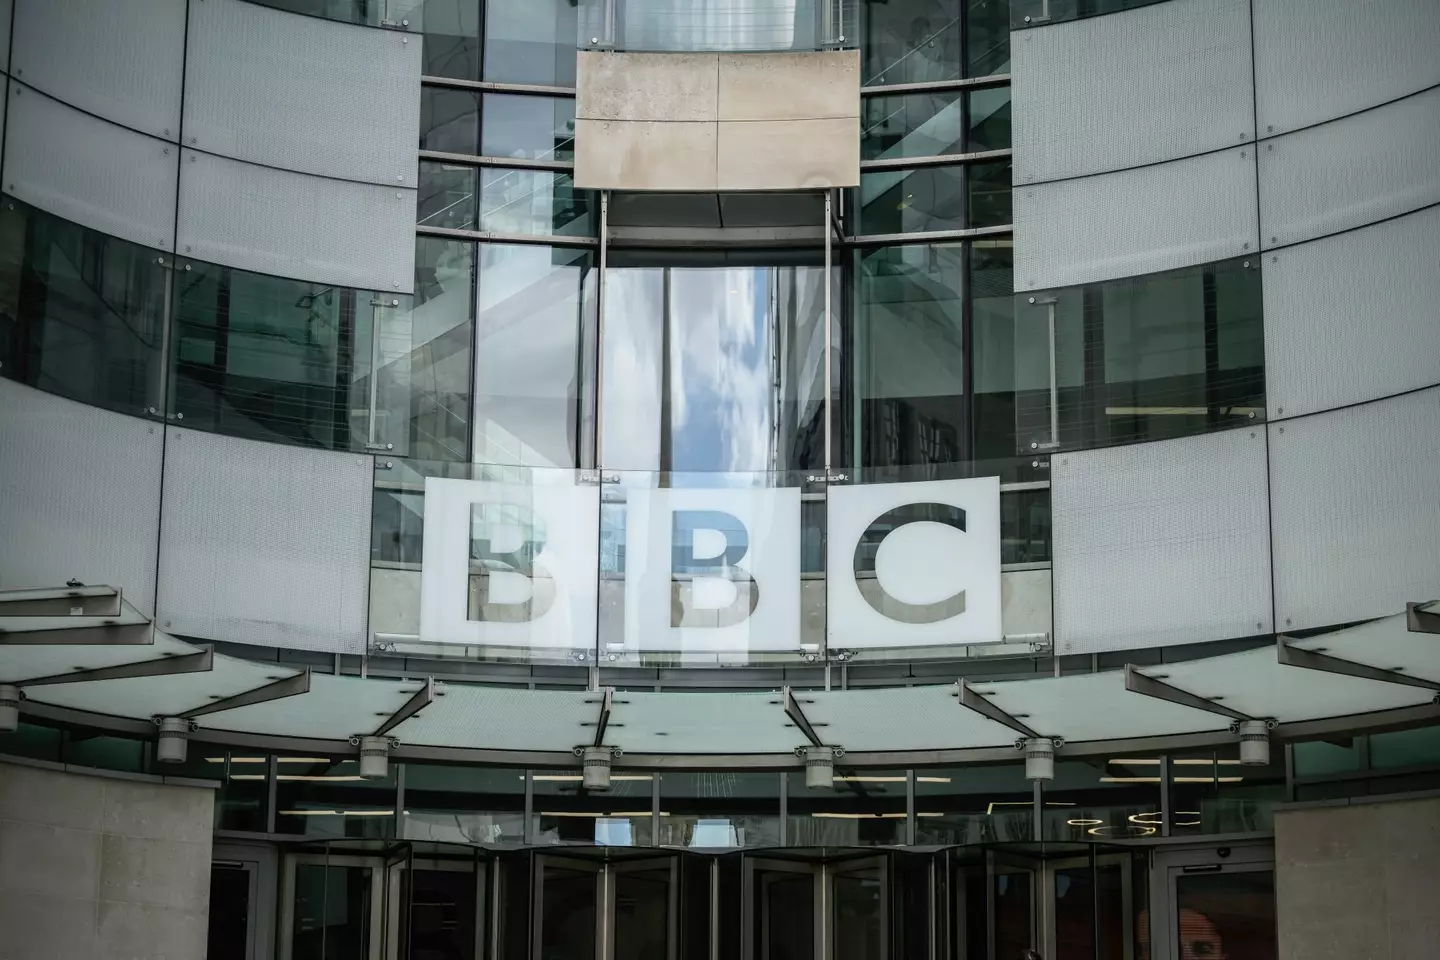 The BBC presenter was suspended following the allegations.